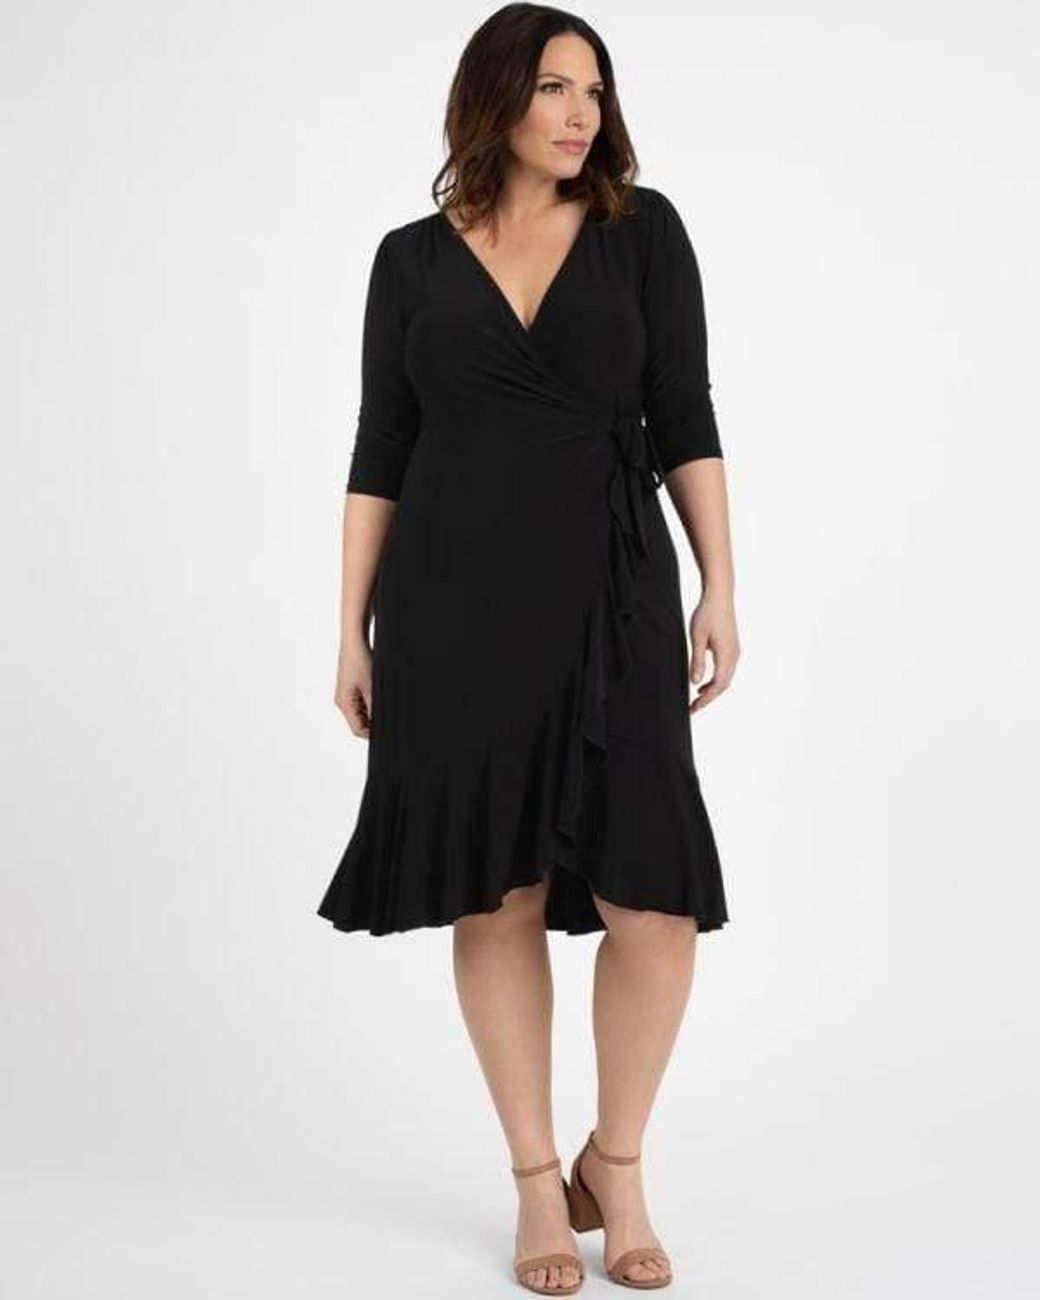 Kiyonna Synthetic Whimsy Wrap Dress in Black - Lyst